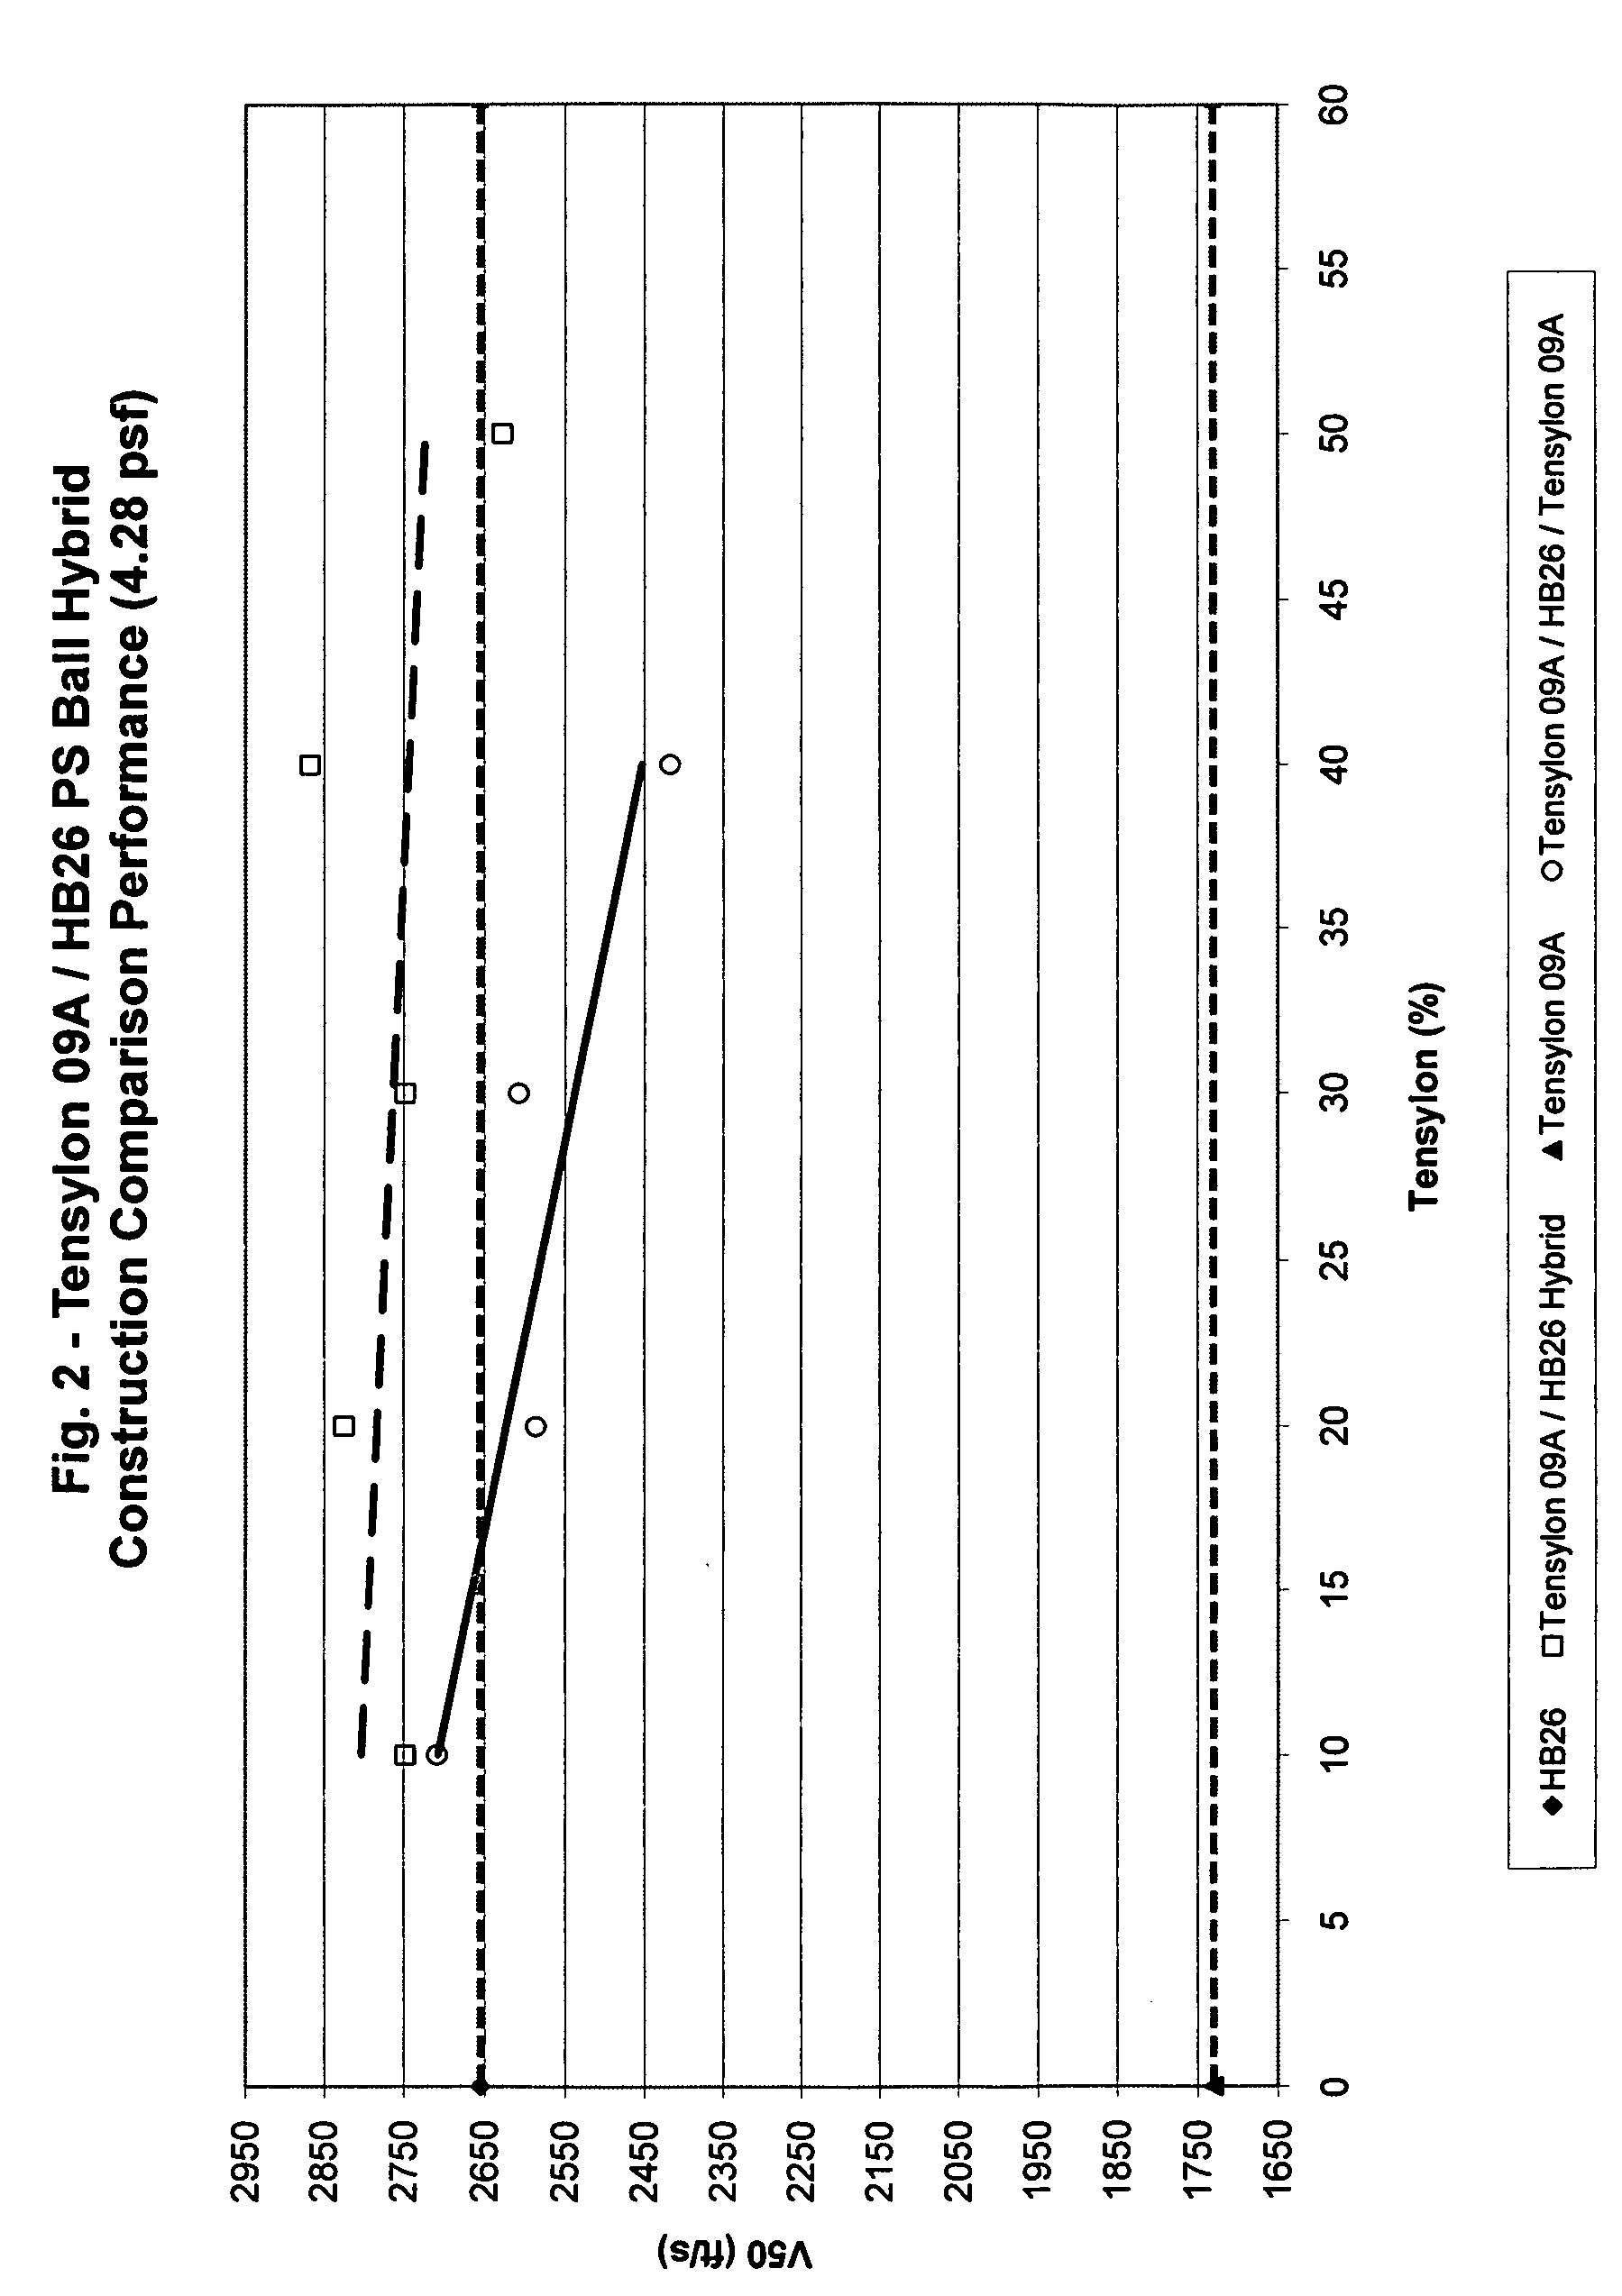 Ballistic-resistant article including one or more layers of cross-plied uhmwpe tape in combination with cross-plied fibers